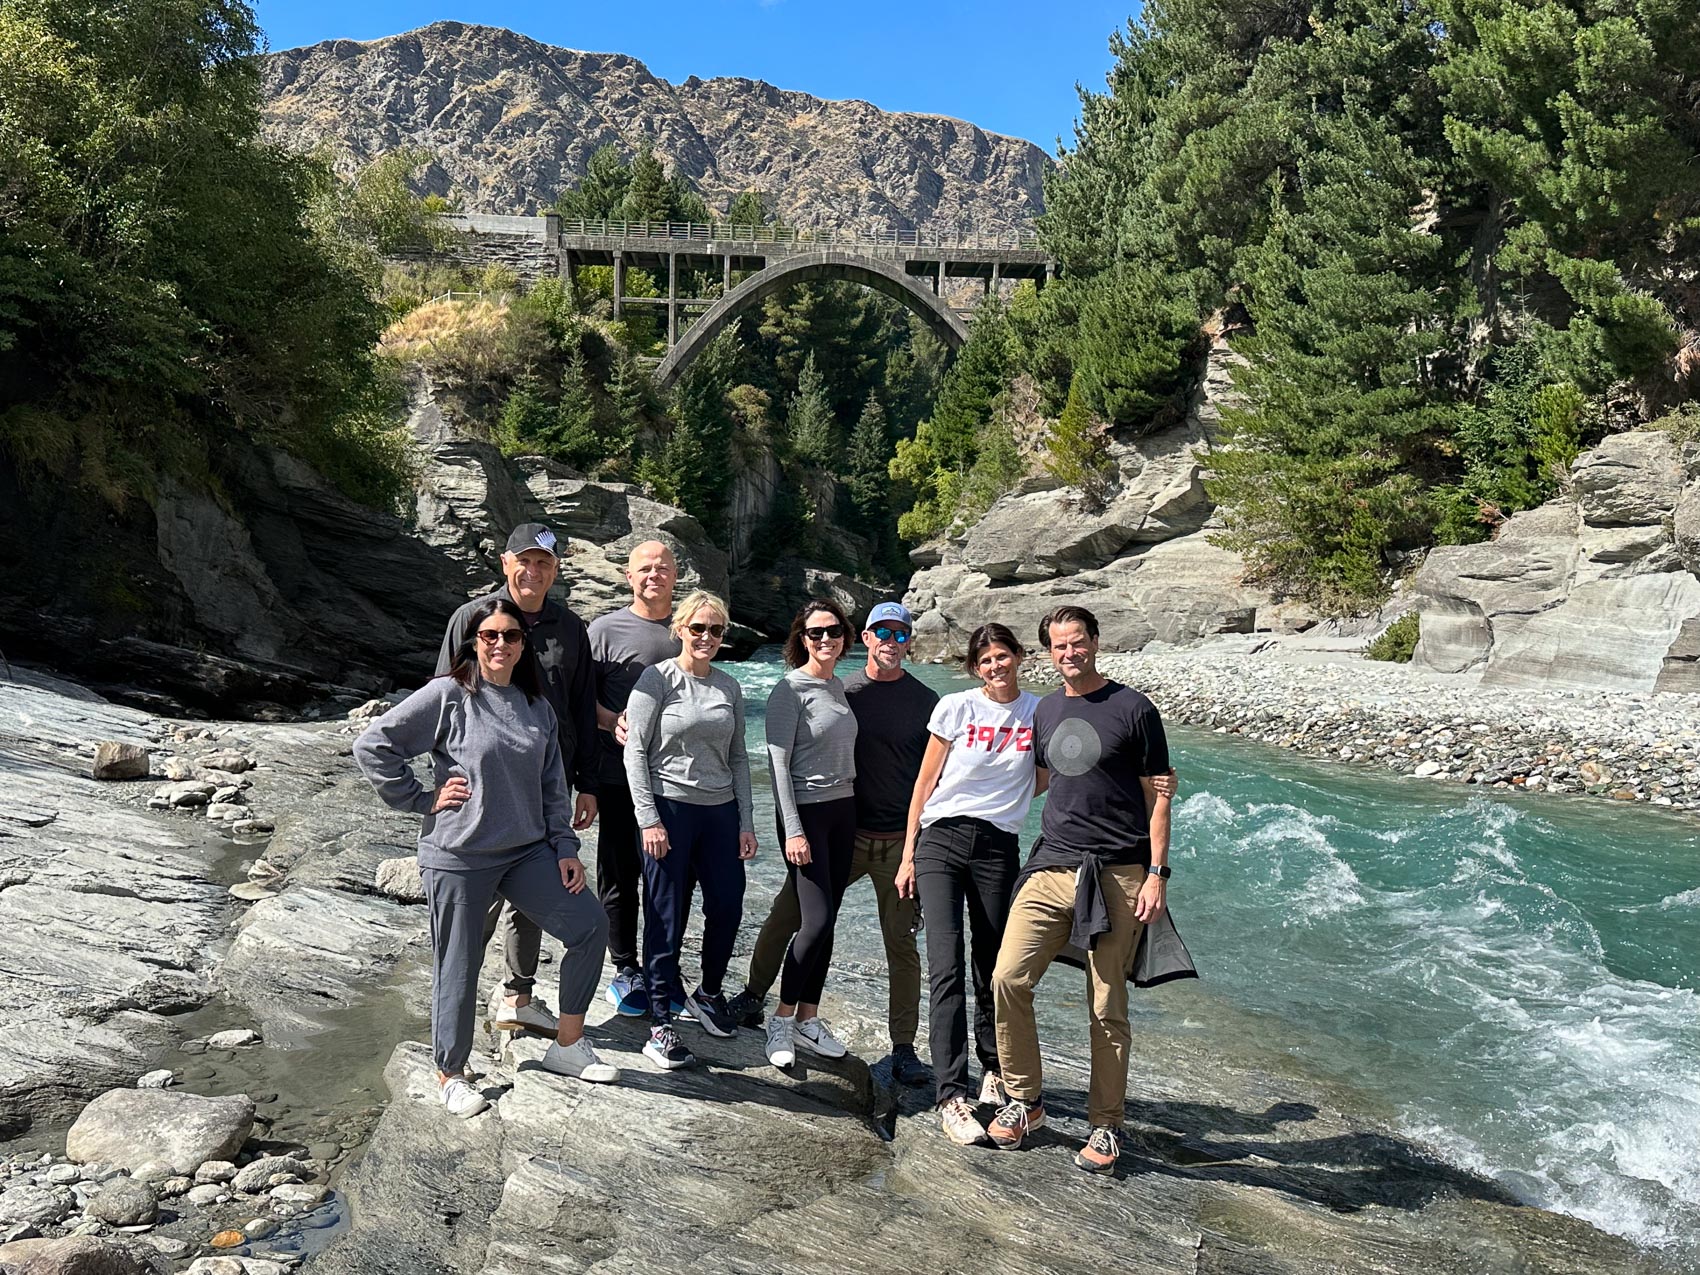 Our travel group by the bridge in New Zealand